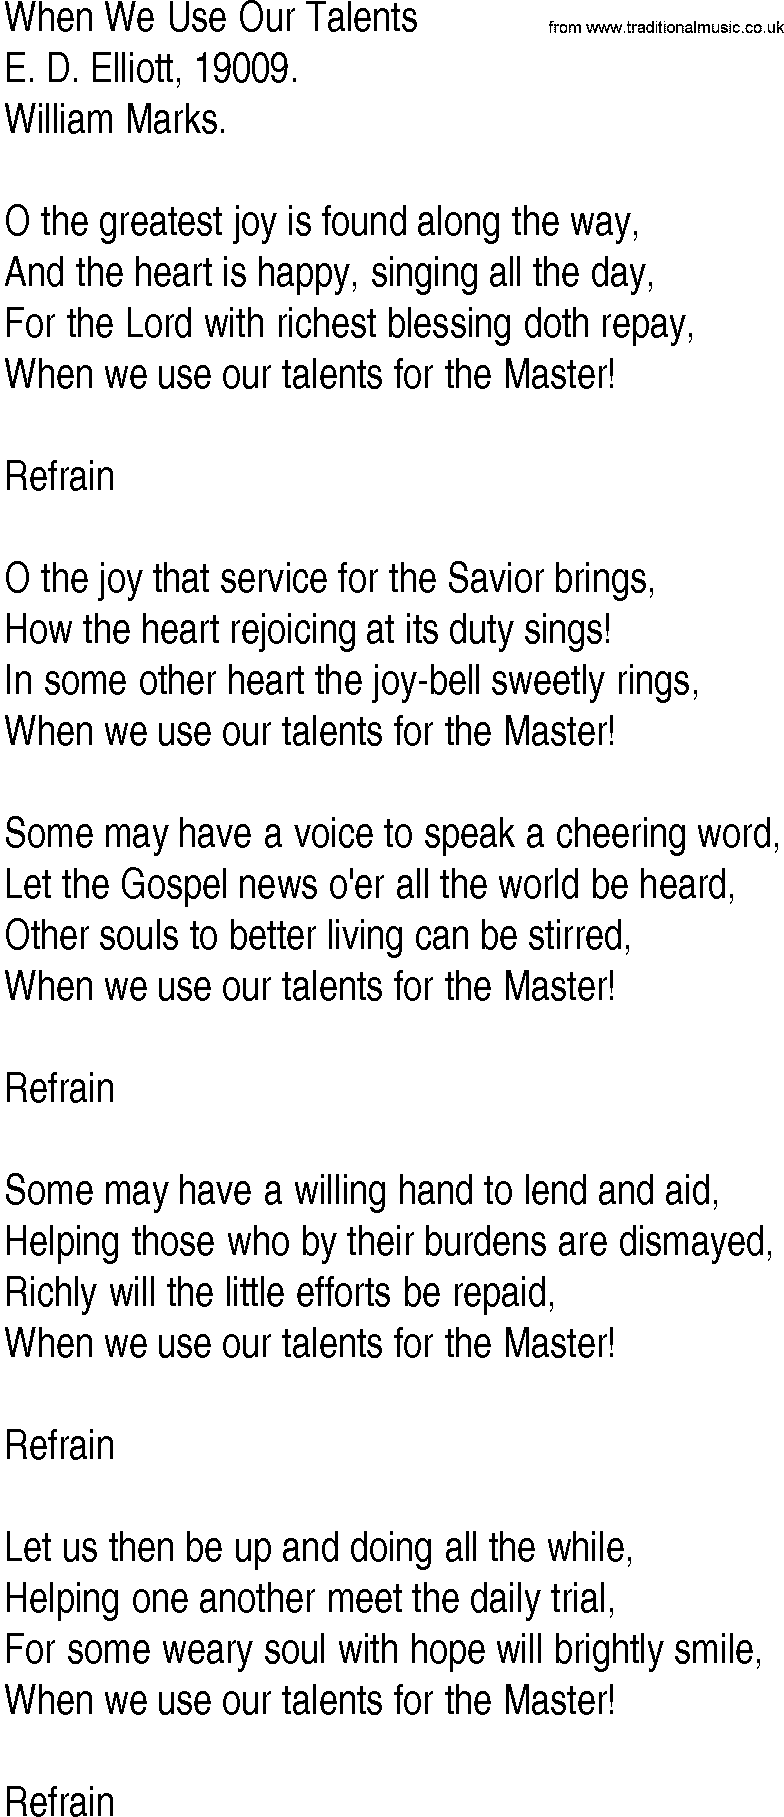 Hymn and Gospel Song: When We Use Our Talents by E D Elliott lyrics